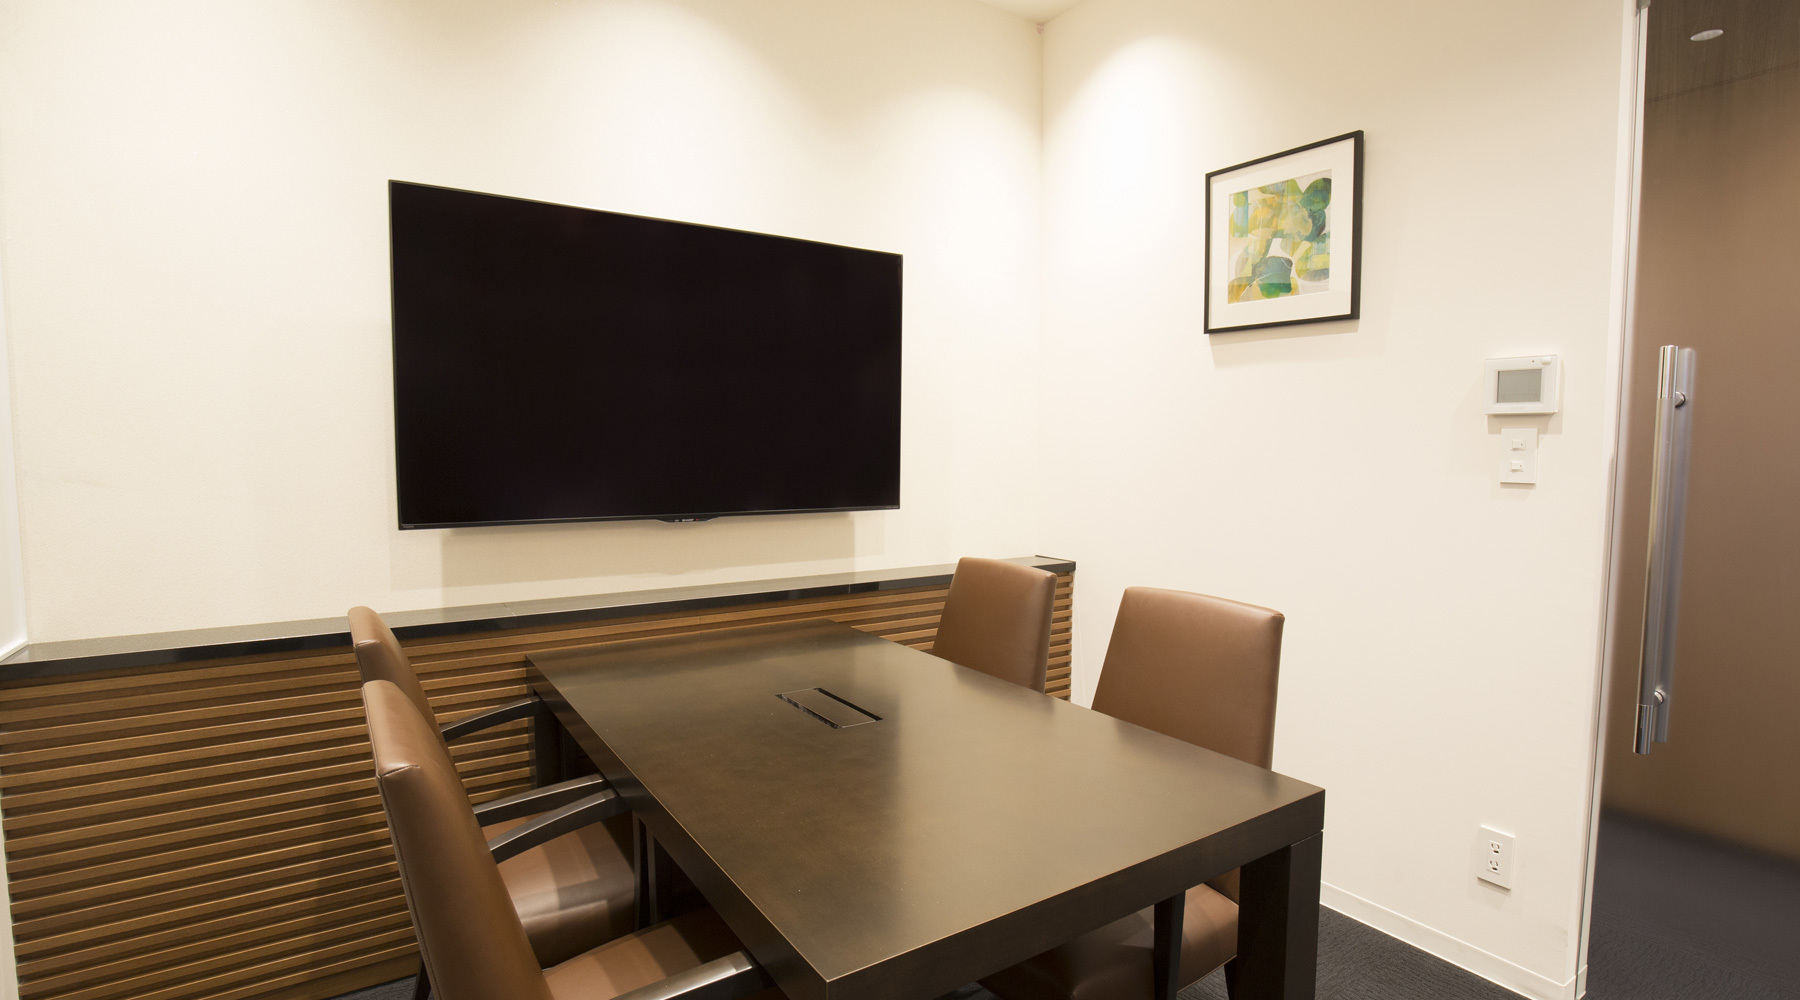 Meeting Rooms_There are a total of 3 meeting rooms: 2 for 4 persons and 1 for 6 persons, equipped with monitors and various facilities (reservation required).